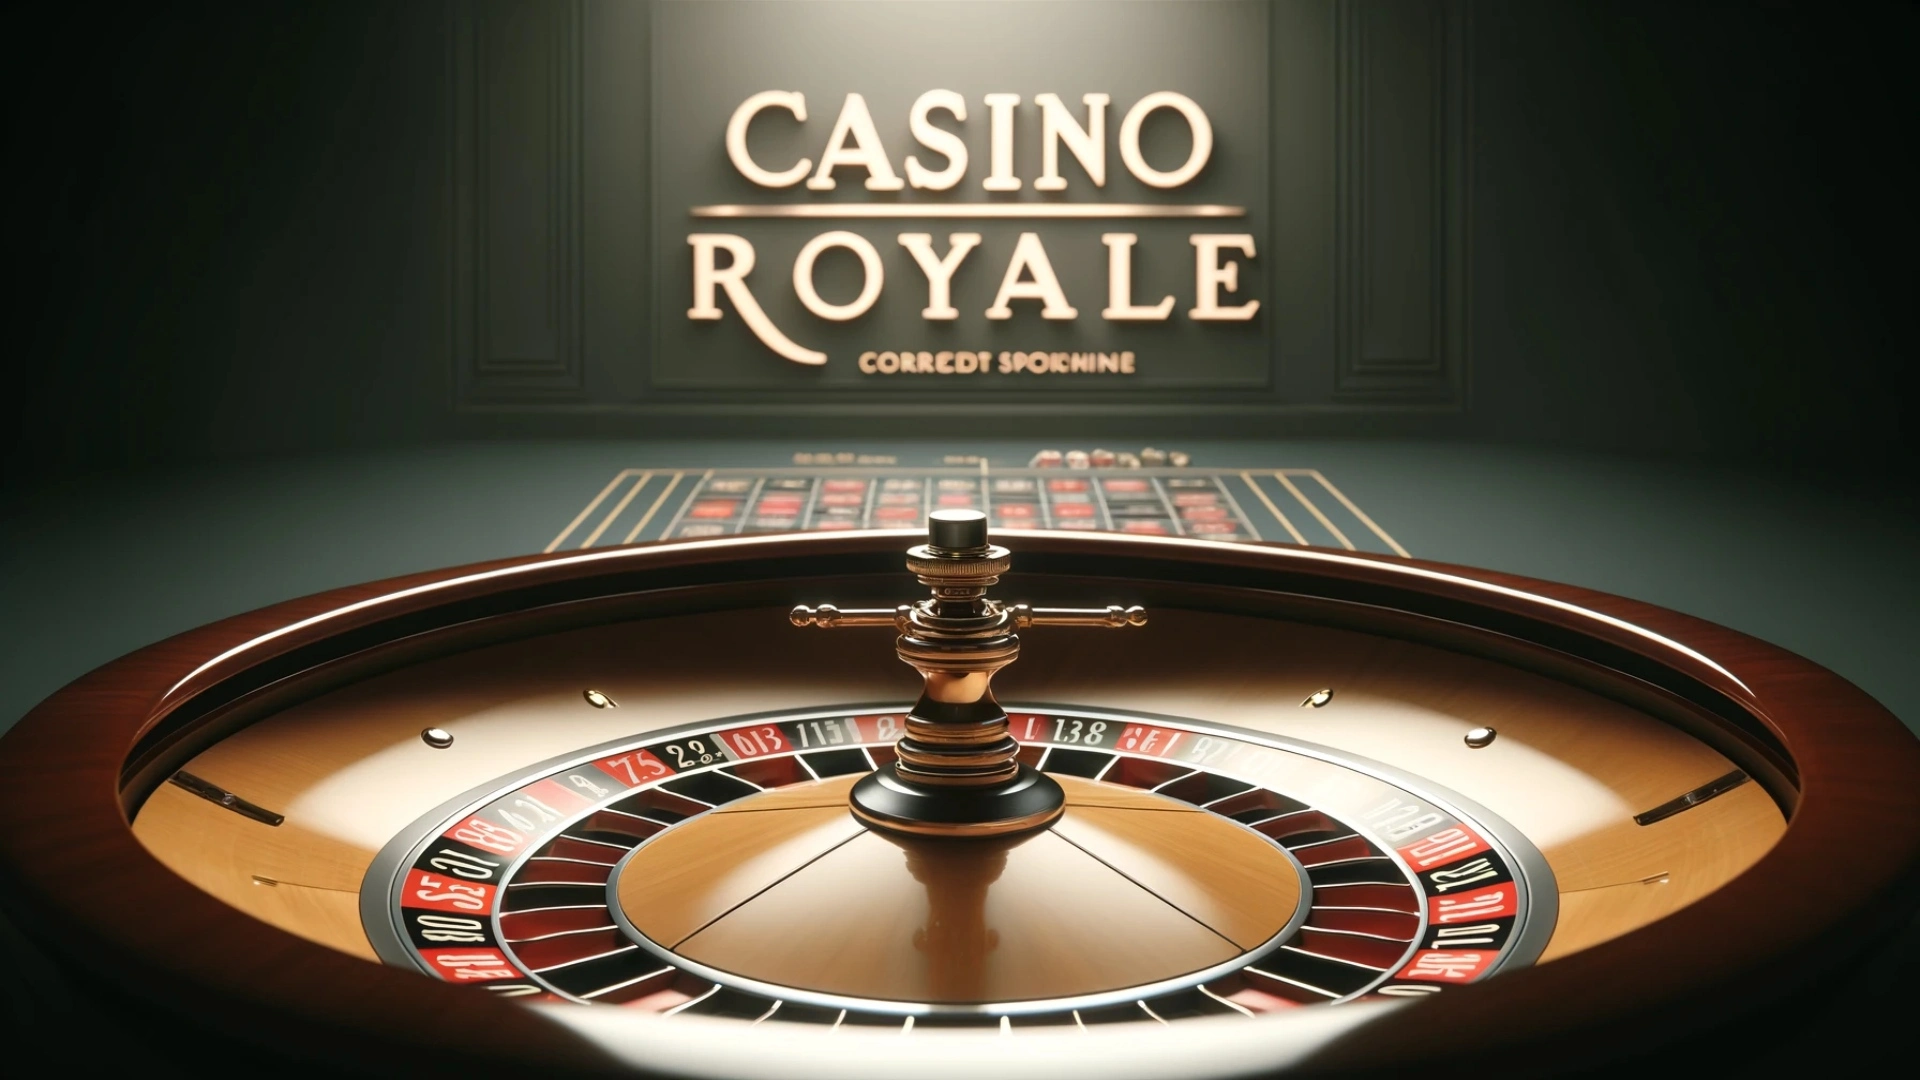 An image of Casino Royale with a simple background